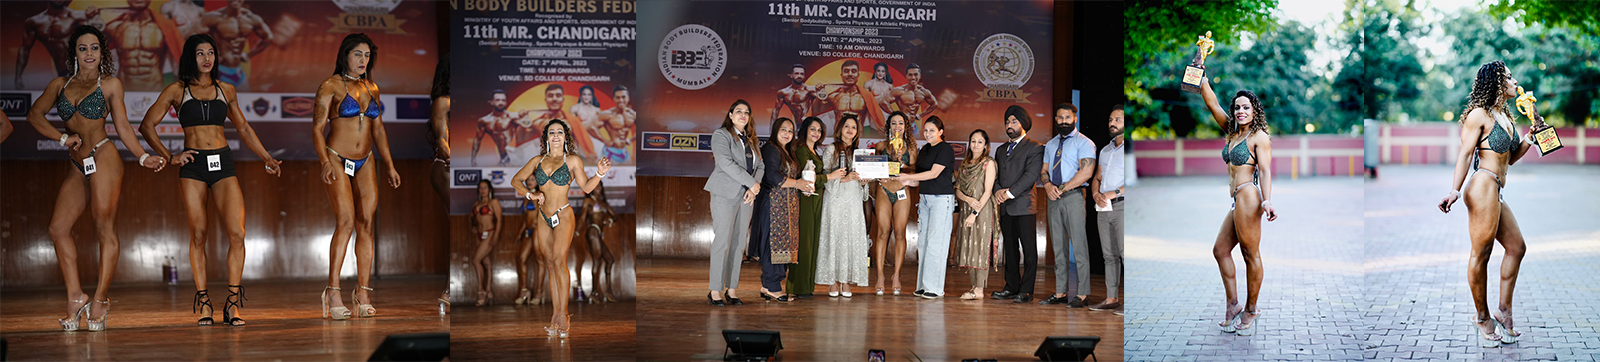 Chandigarh Residents Open-Minded: Rajneet Kaur, Winner of Ms Chandigarh Body Building Competition